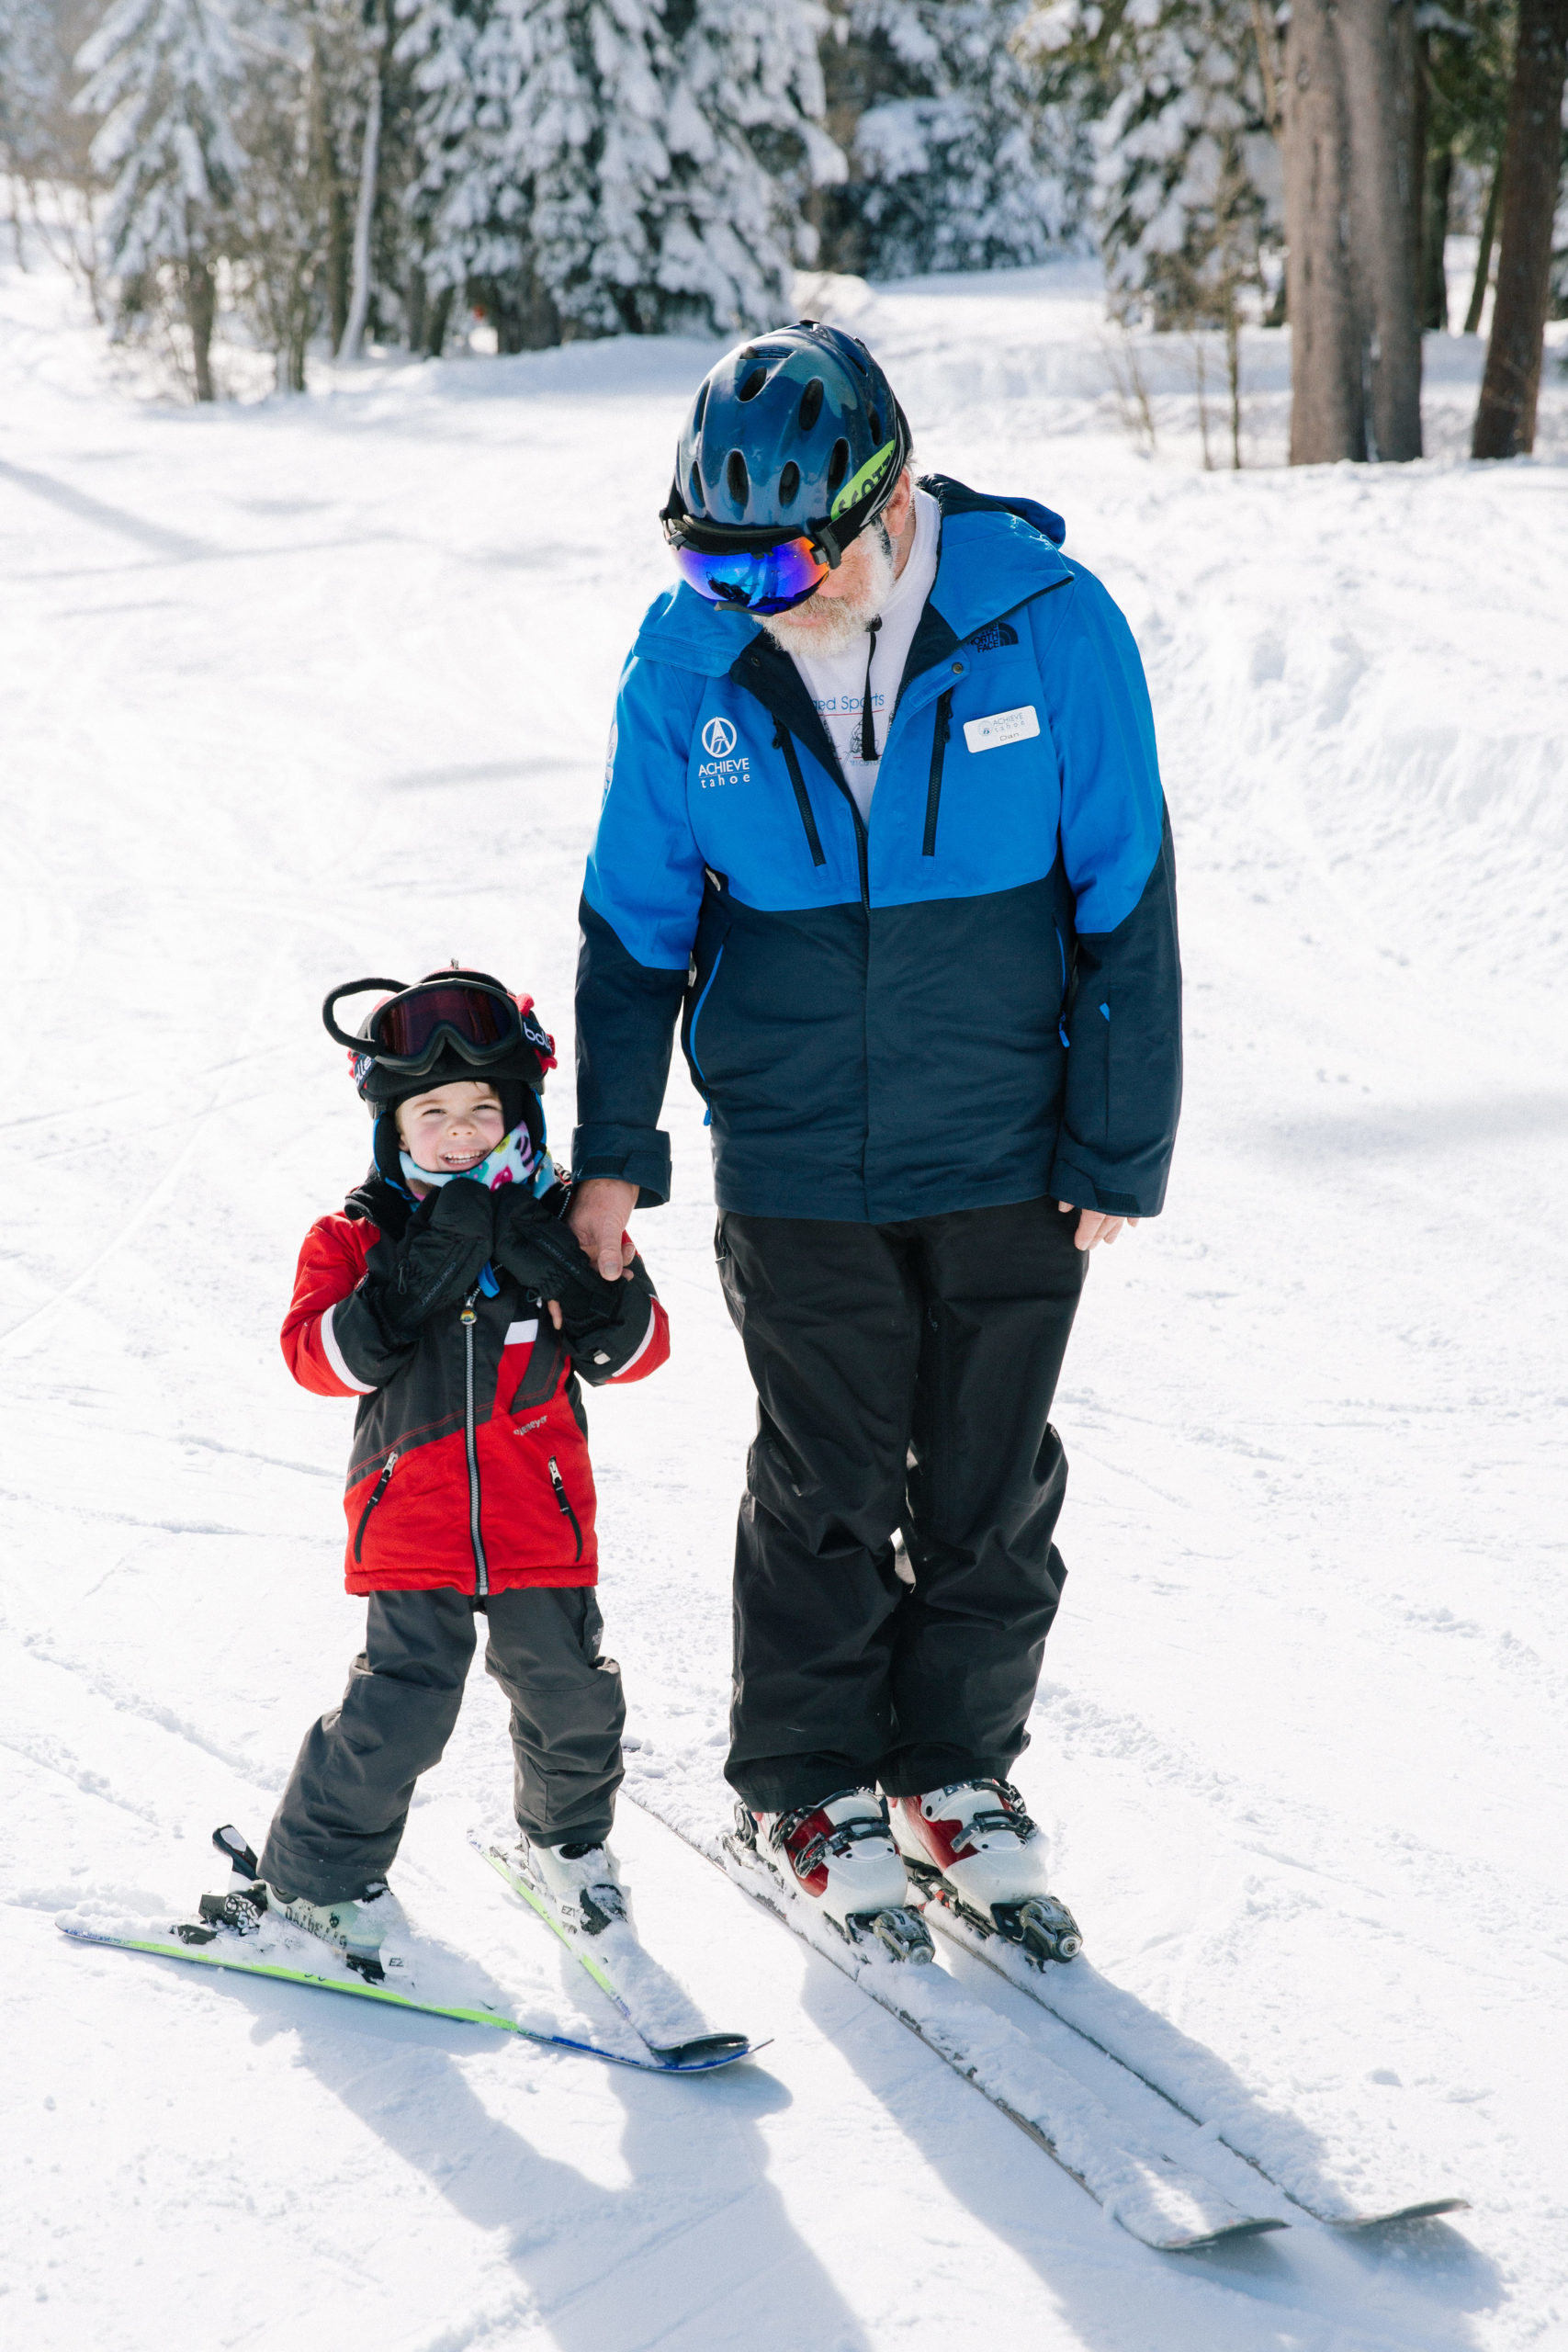 Learning to ski with Autism? No problem.